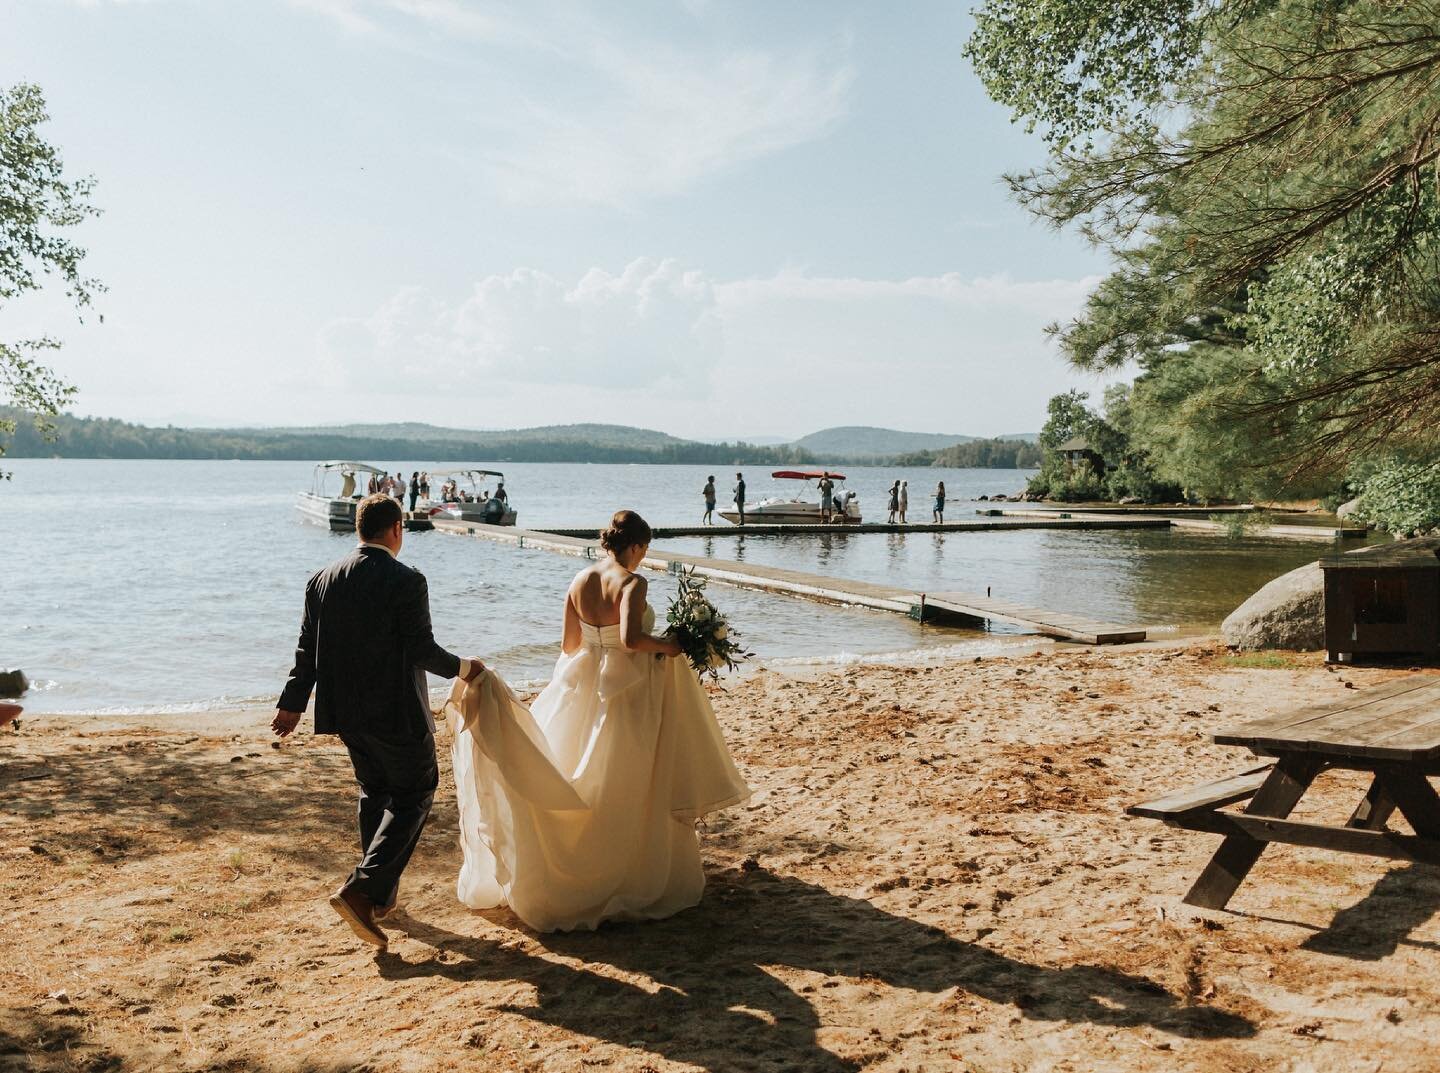 S+G&rsquo;s intimate, summer camp, Covid-pod ceremony last year was so sweet - today they finally get to celebrate at @cunninghamfarmmaine with all of their friends and family for a special vow renewal, dance party and alllll the hugs they can handle